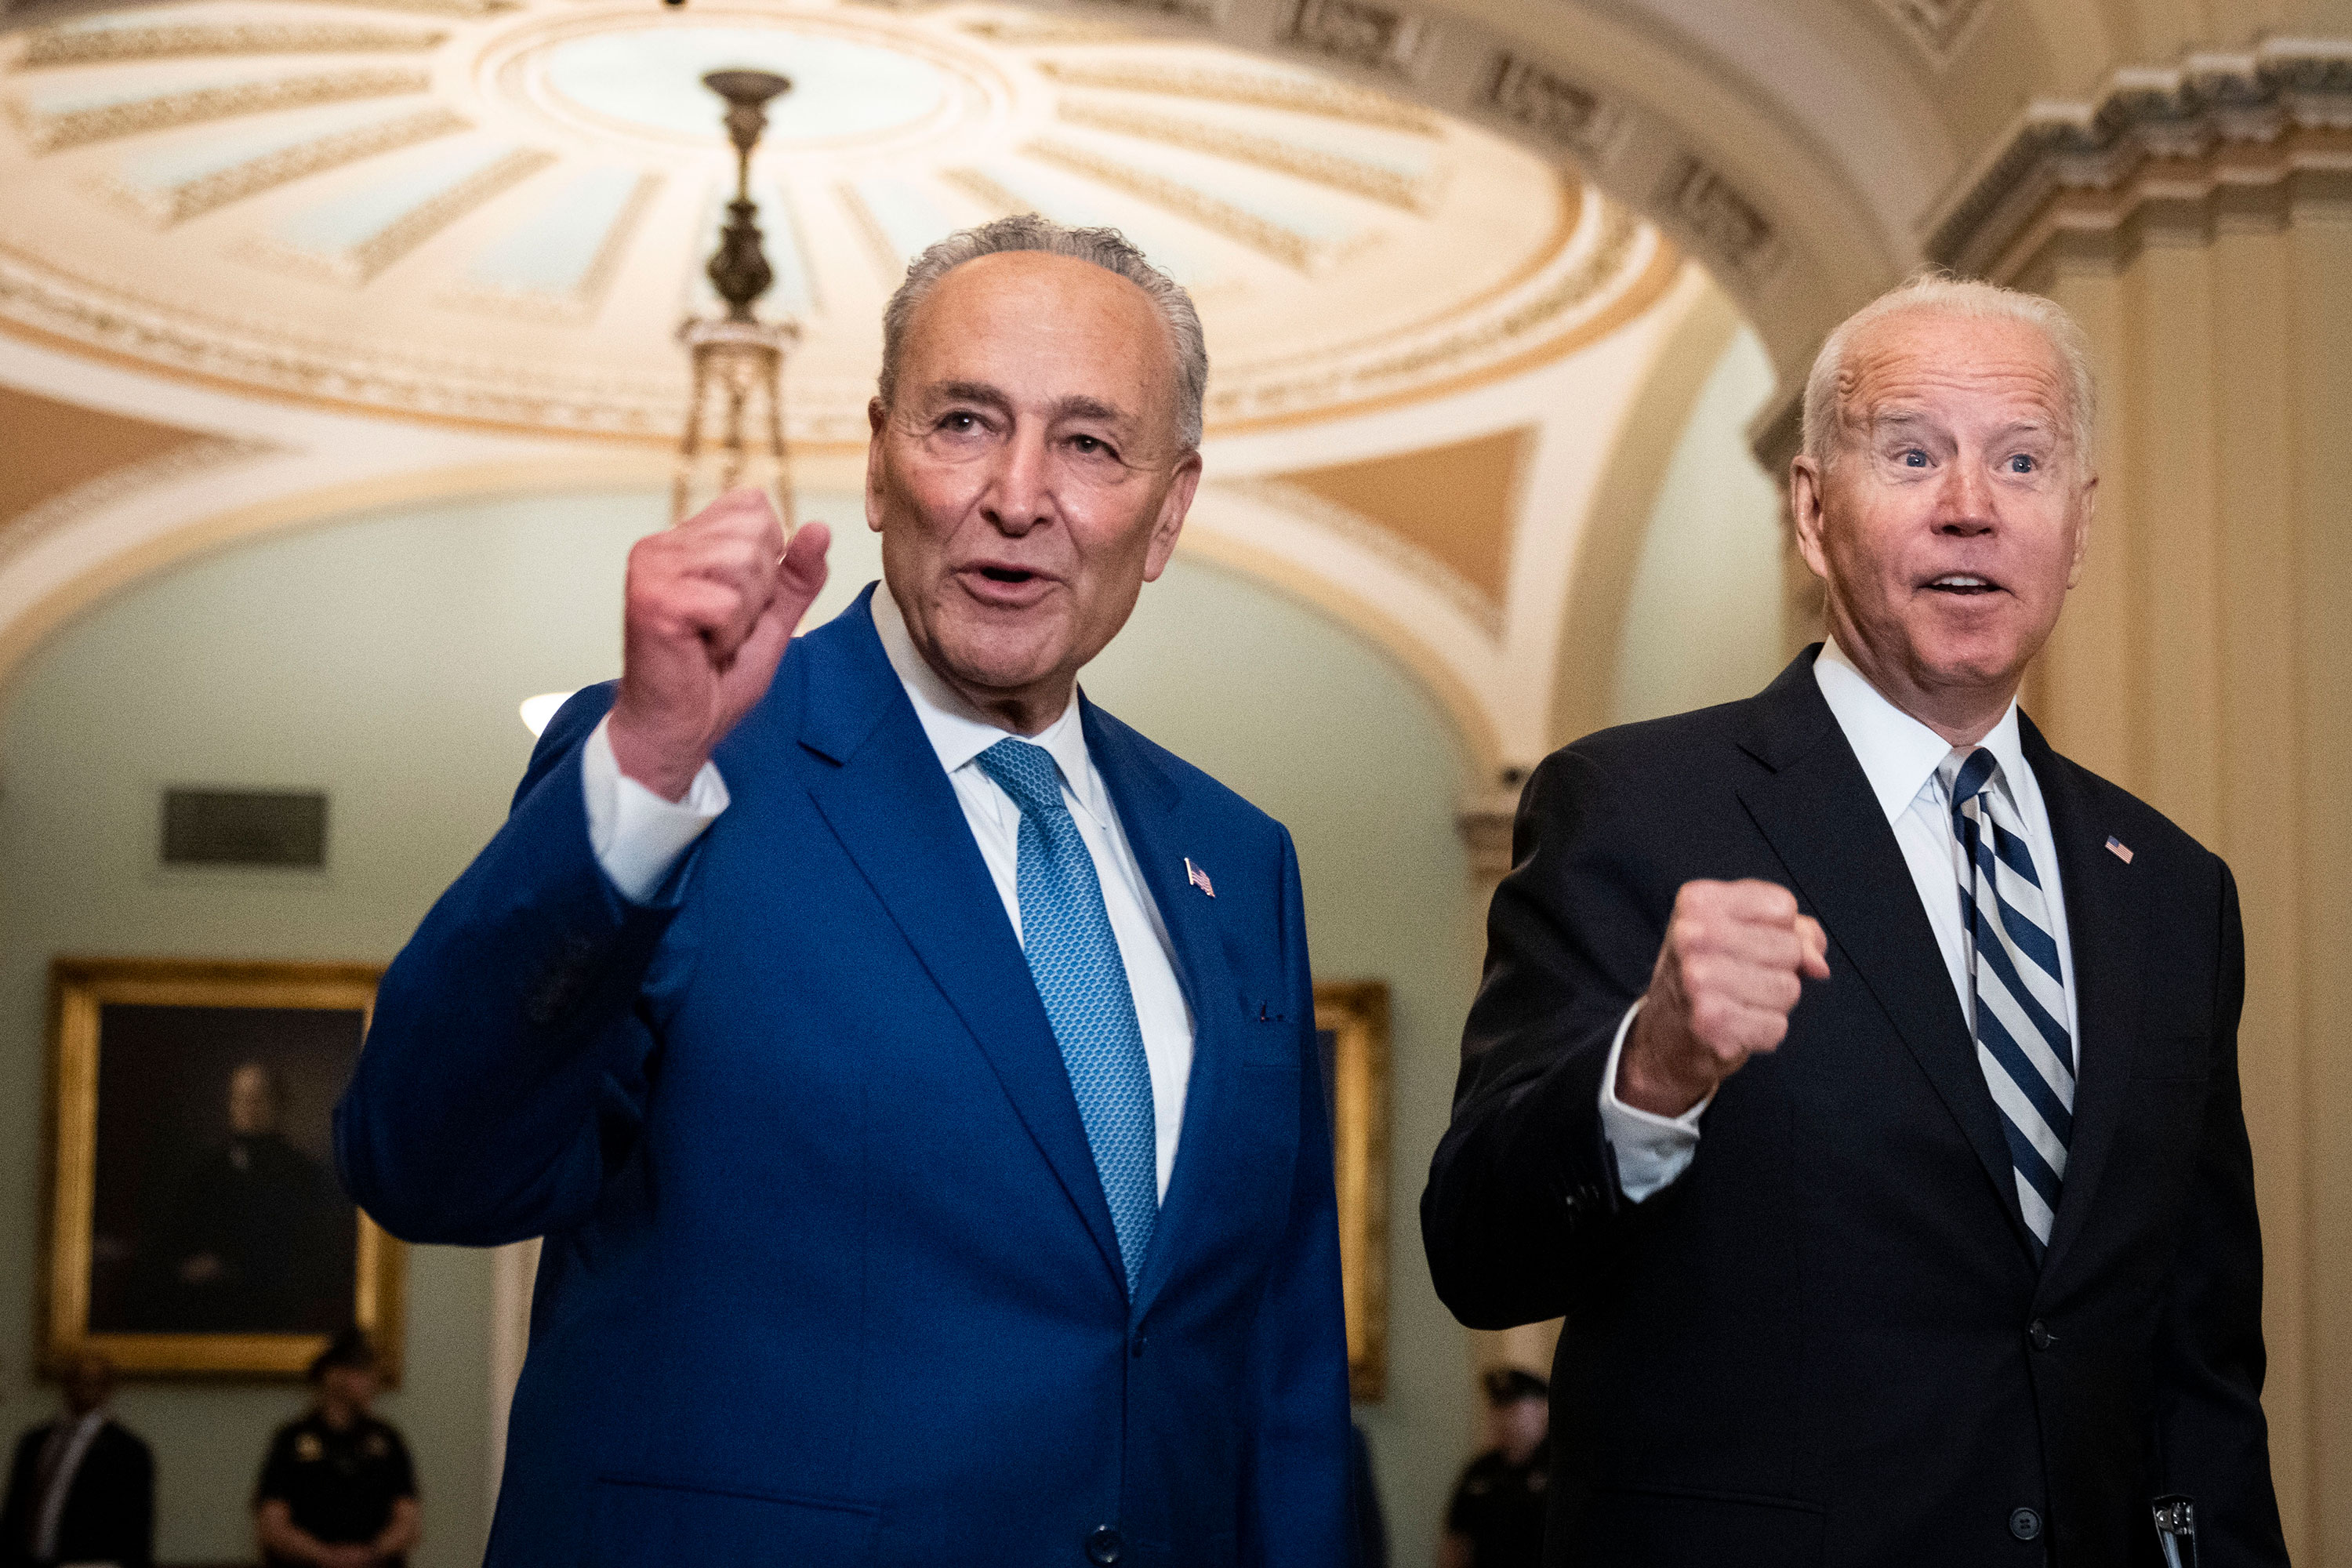 Senate Majority Leader Chuck Schumer and President Joe Biden speak briefly to reporters as they arrive at the US Capitol in July 2021.